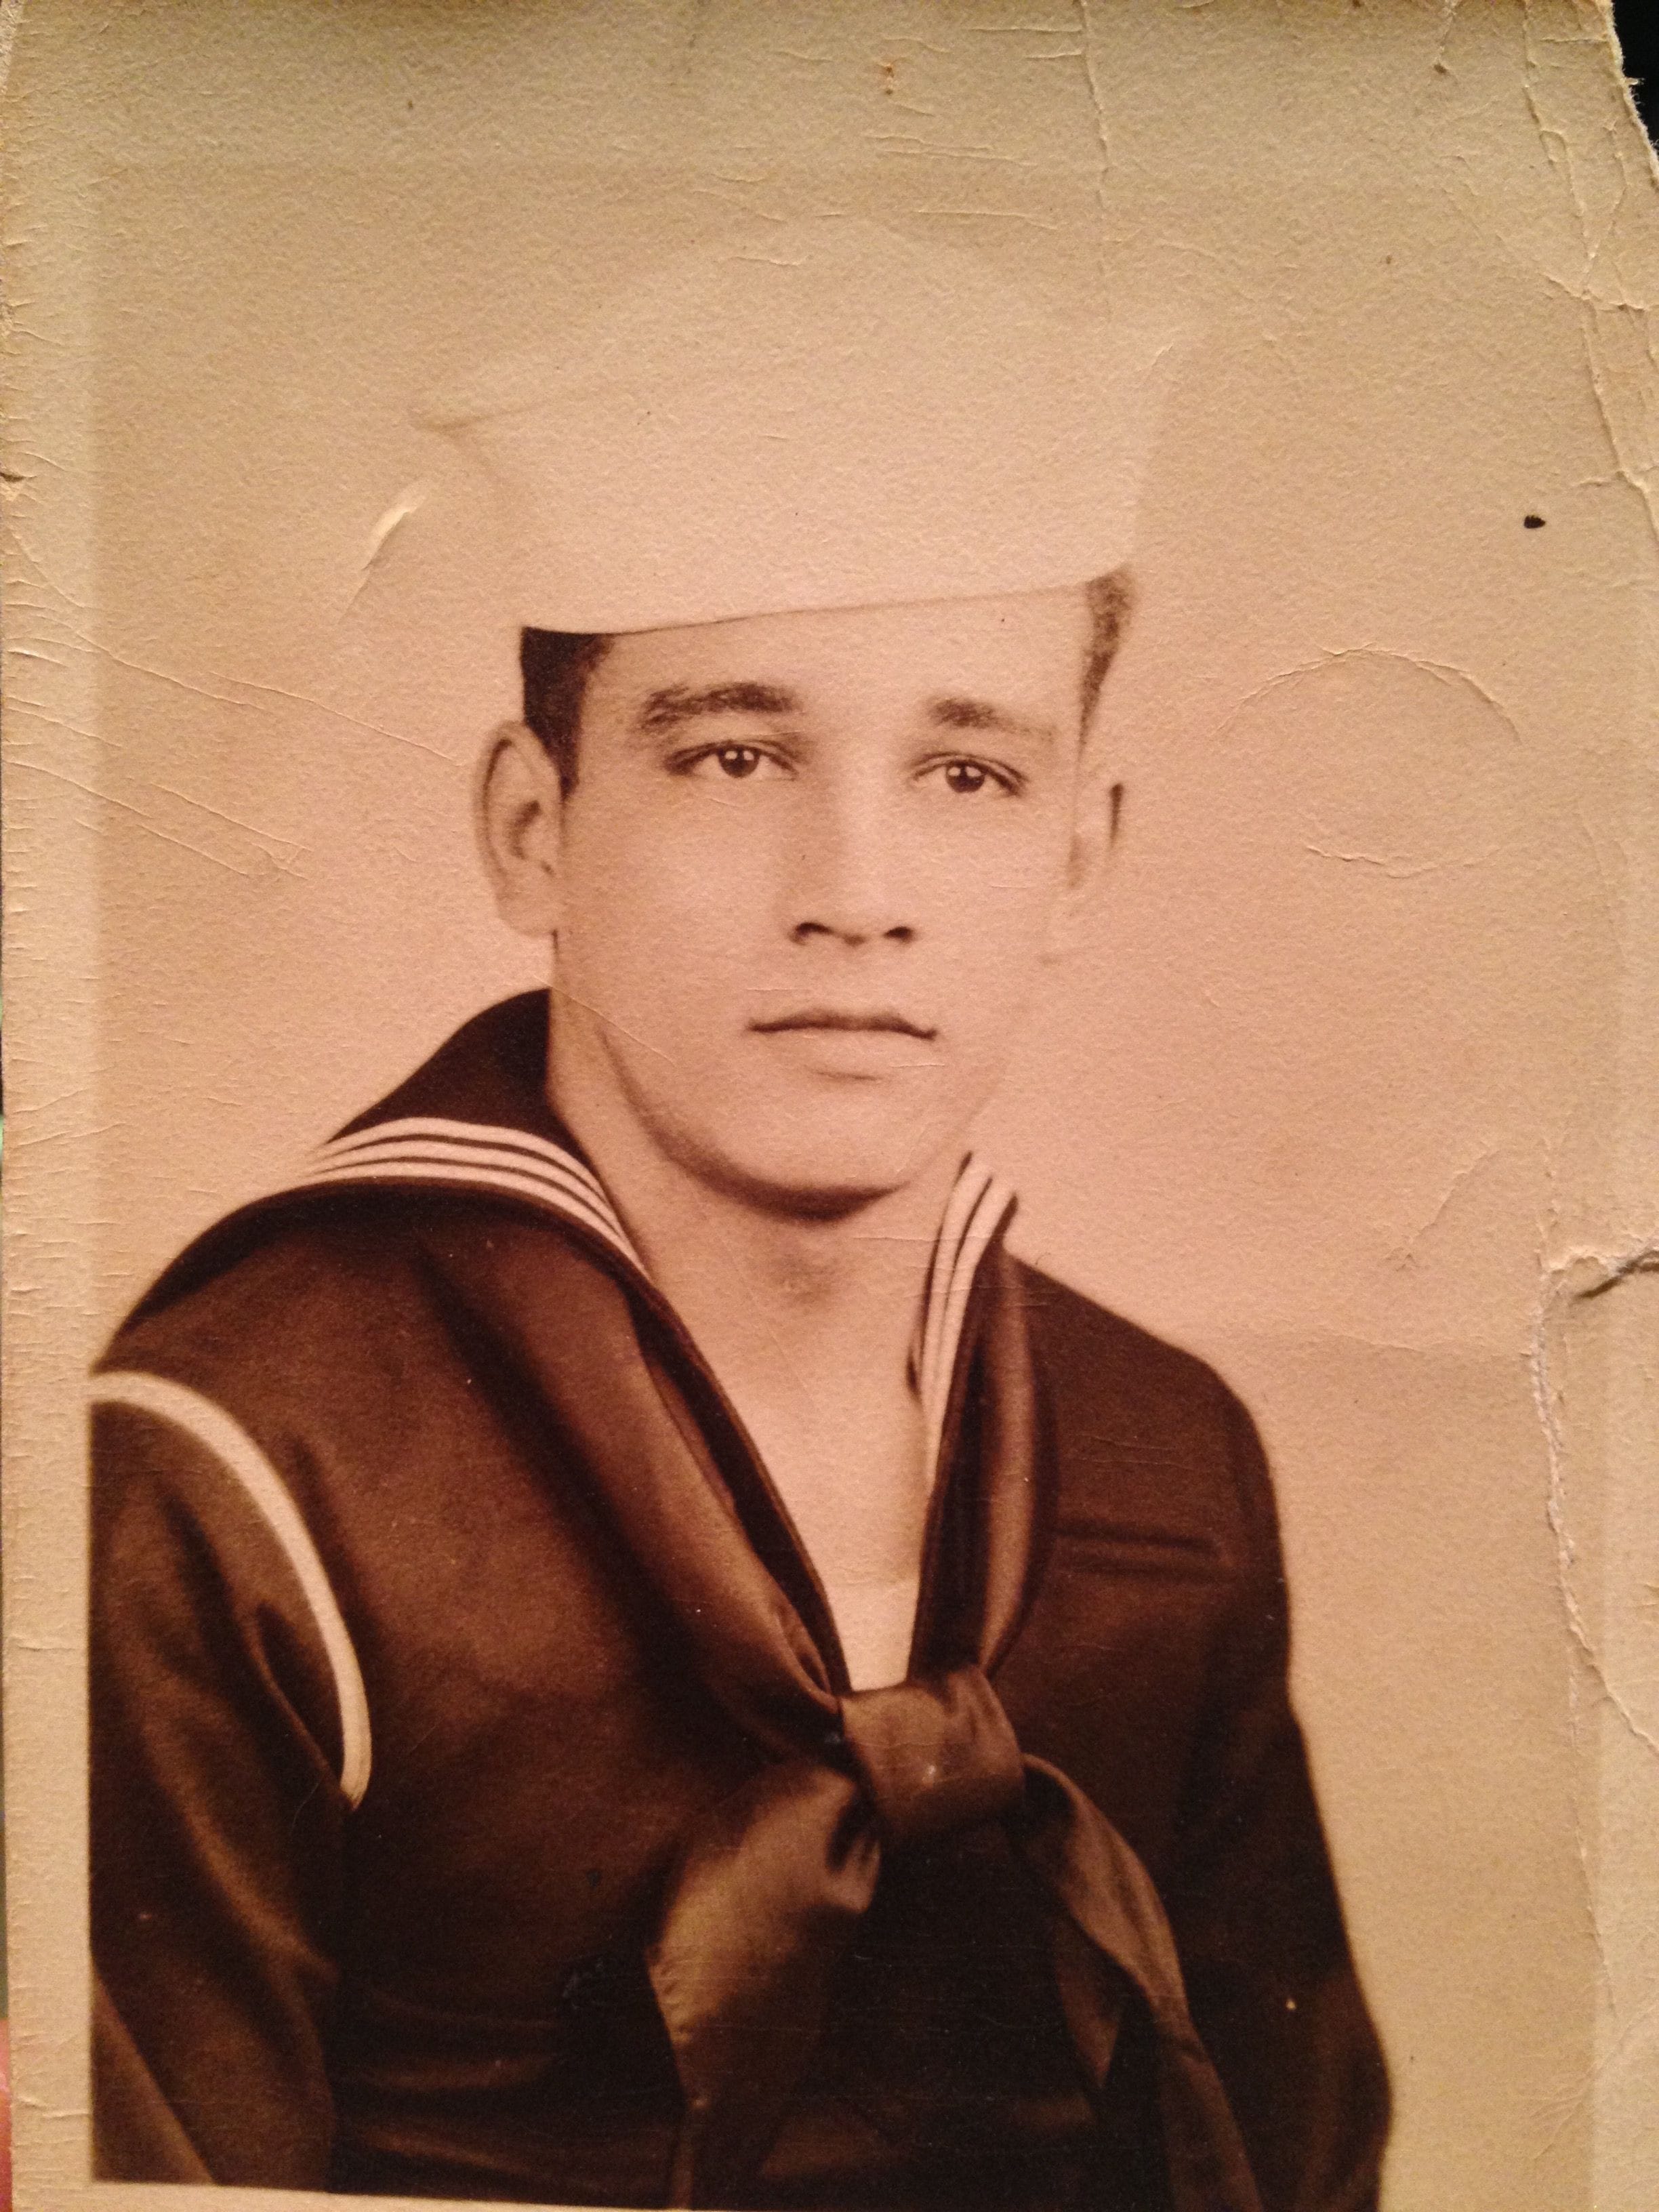 Alfredo Pacheco, Petty Officer 1st Class, Navy, Served from 1947-1956